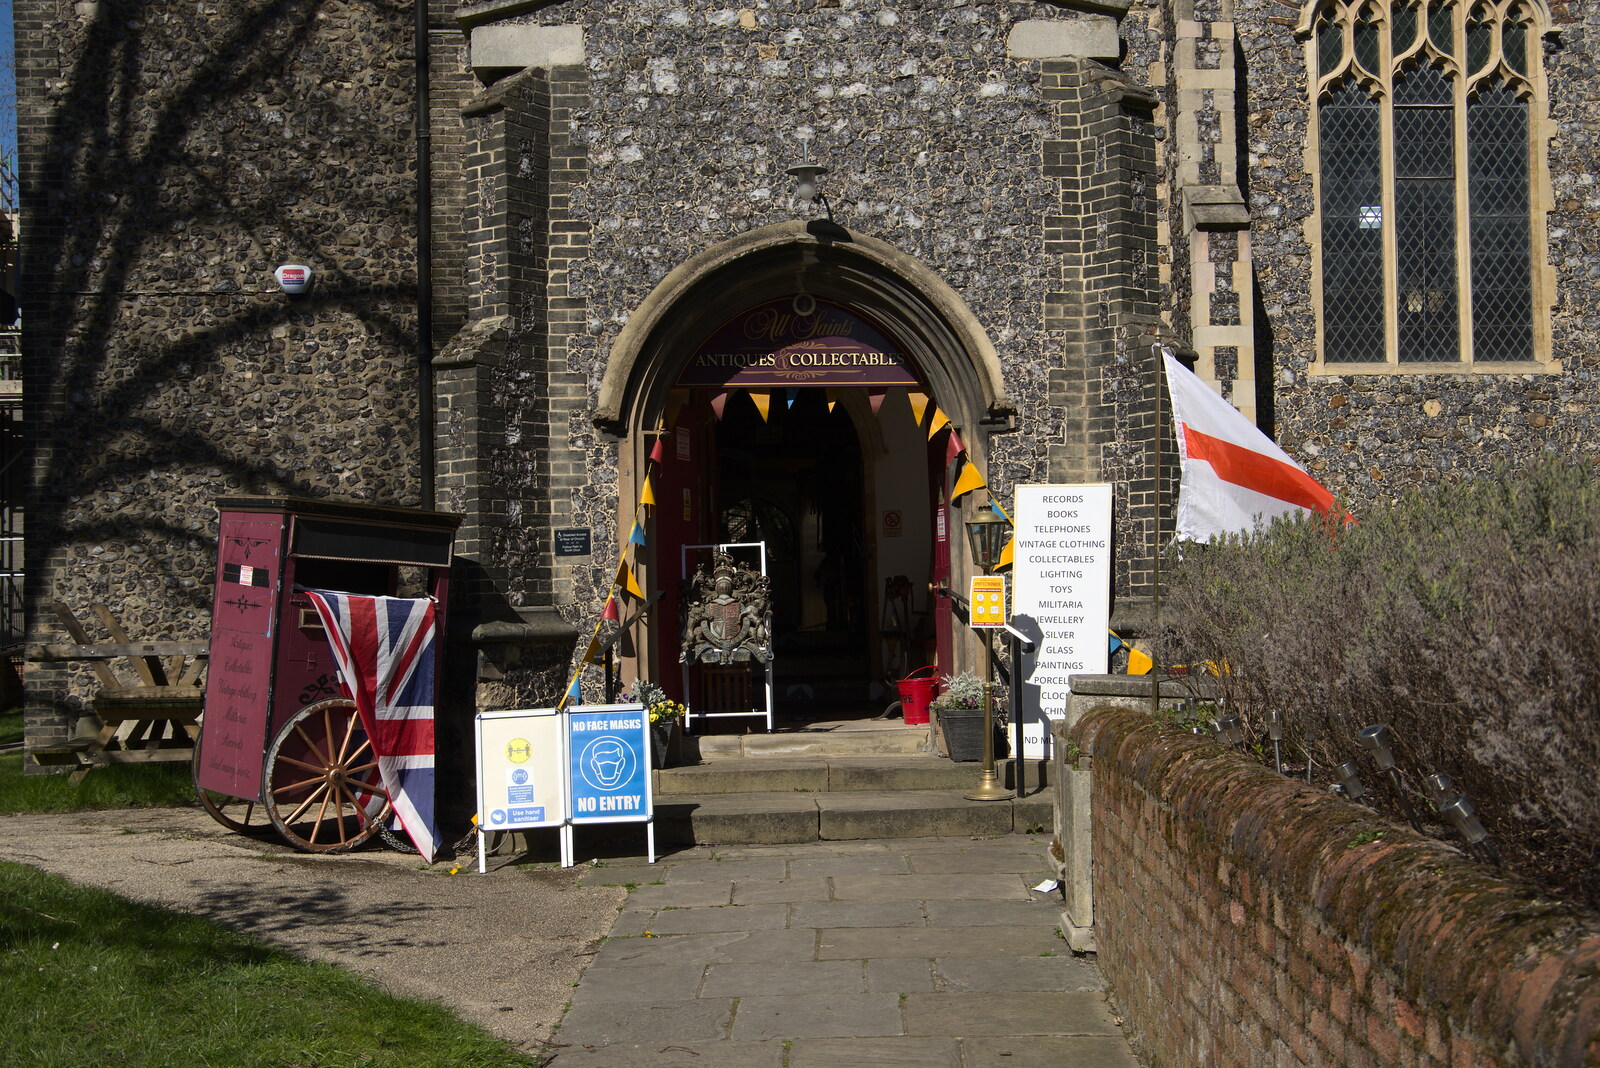 There's an antique fair on in the old church from The Death of Debenhams, Rampant Horse Street, Norwich, Norfolk - 17th April 2021